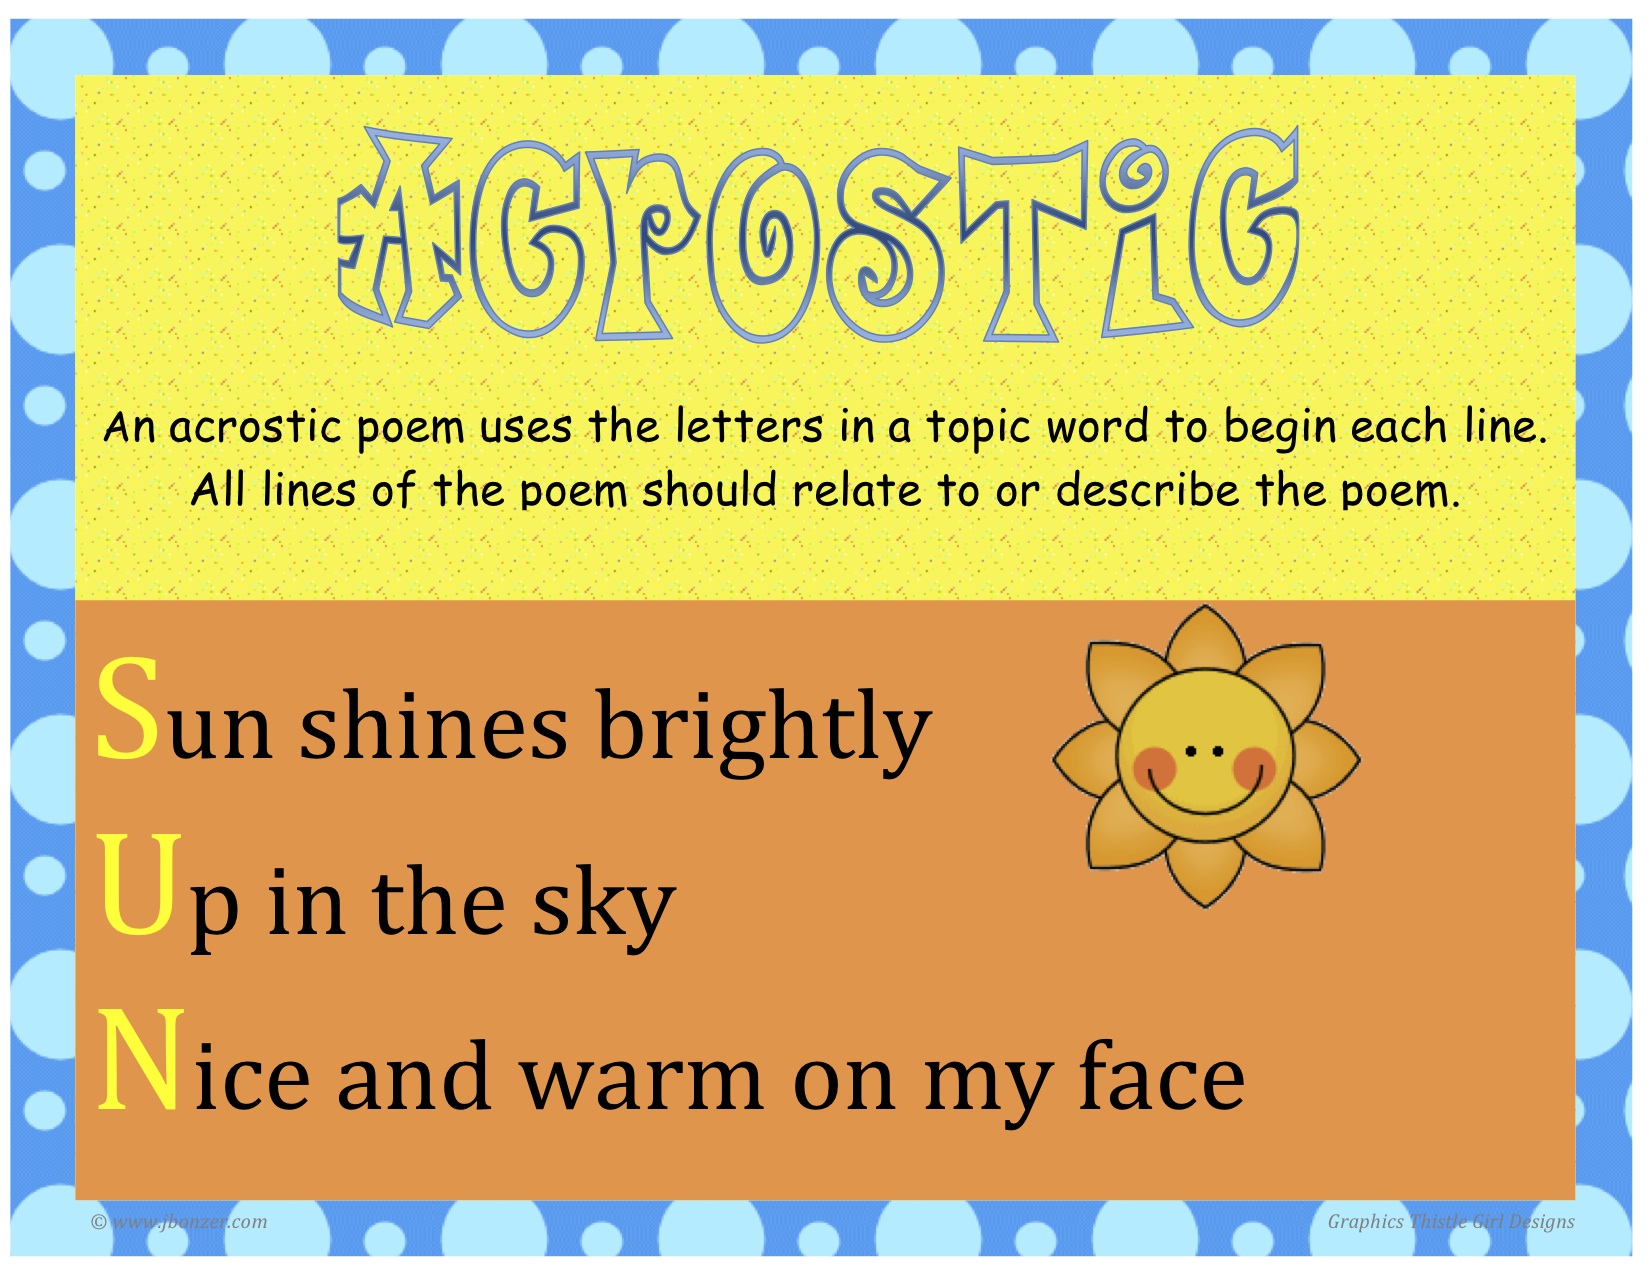 Poems For Kids About School That Rhyme Shel Silverstein In English To Recite About Friends In Urdu Acrostic Poems For Kids Poems For Kids About School That Rhyme Shel Silverstein In English